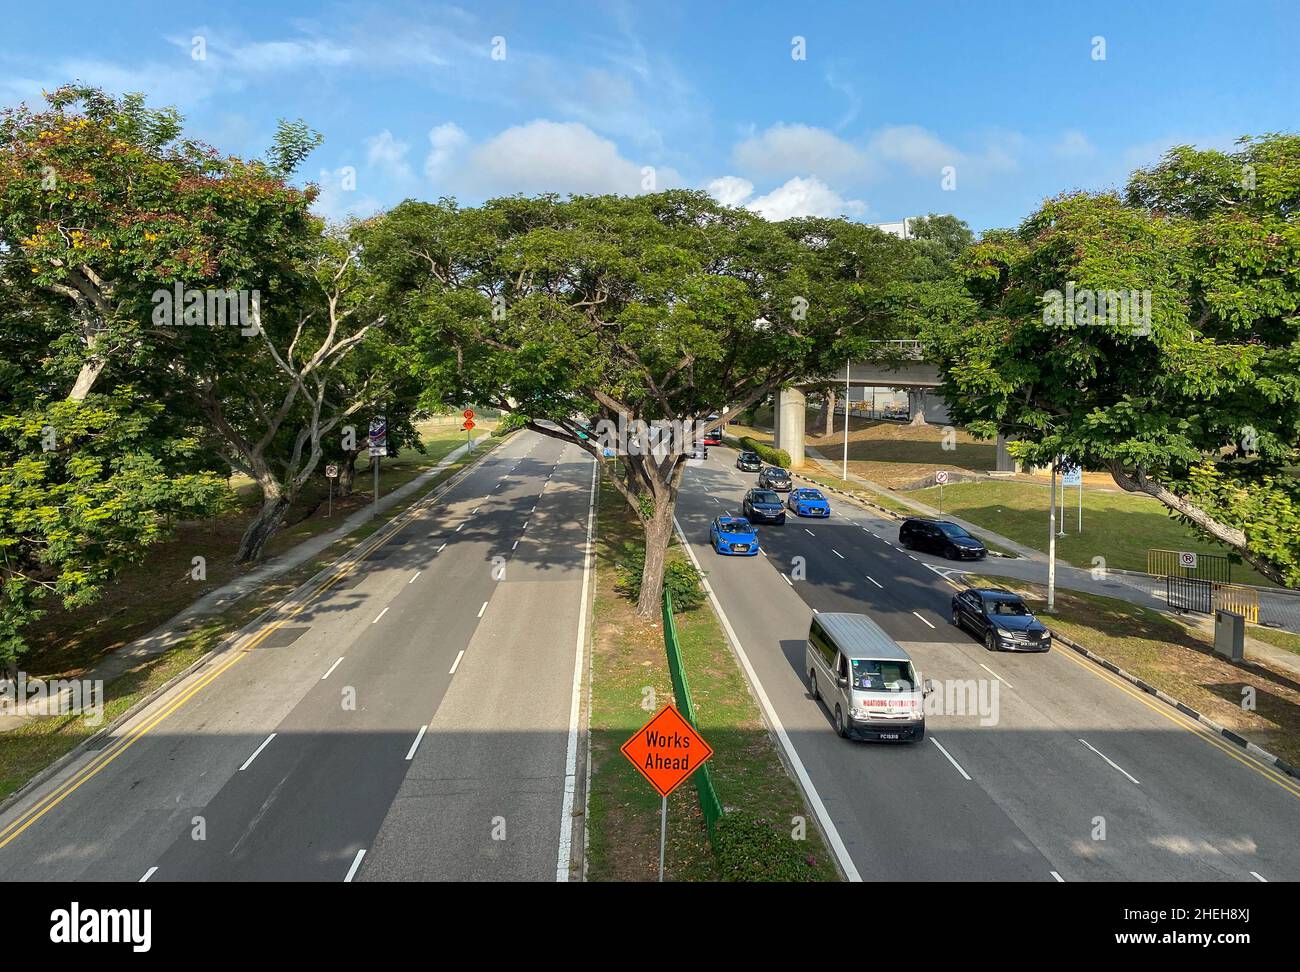 Singapore - Feb 11, 2020. Street of Singapore Downtown. Singapore today revealed lofty goals for becoming a greener country by 2030. Stock Photo